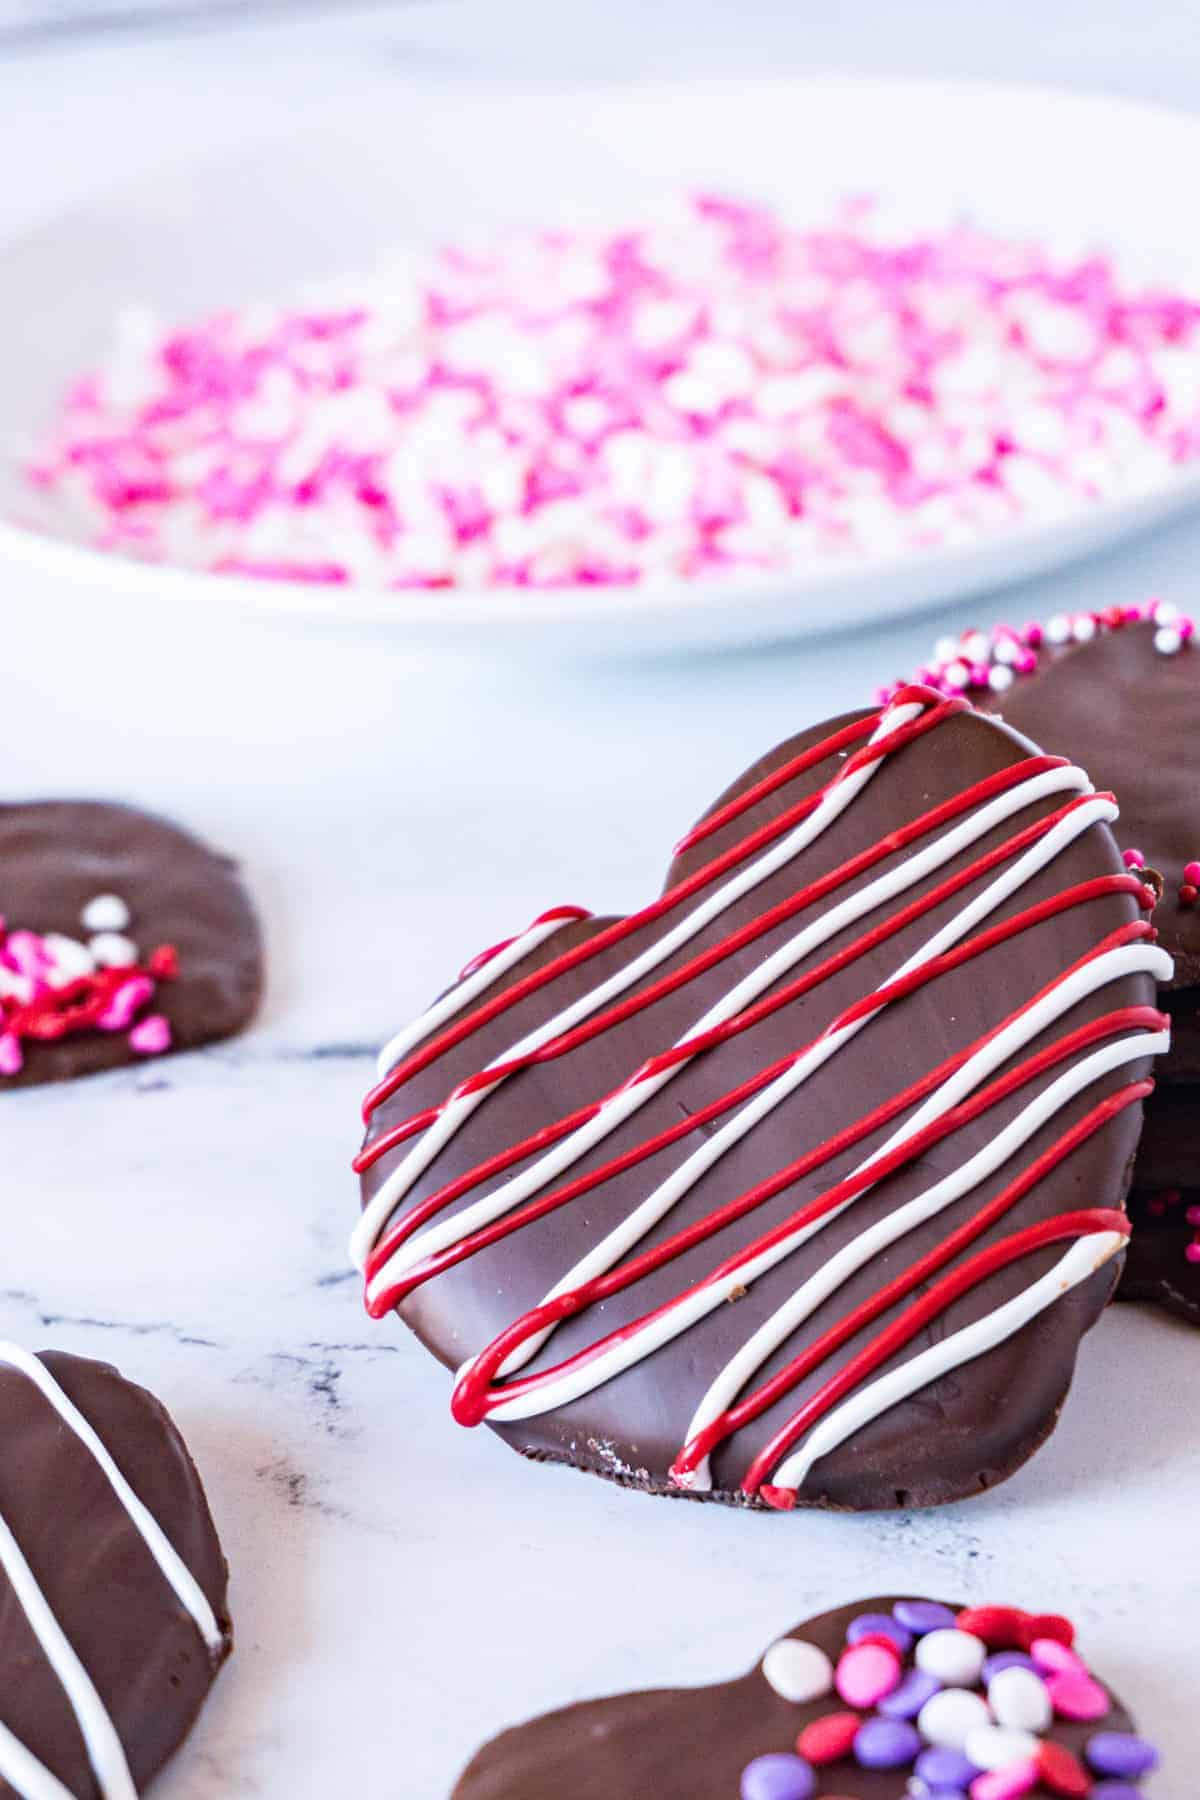 Chocolate covered cherry cookies with white chocolate drizzle decorations.